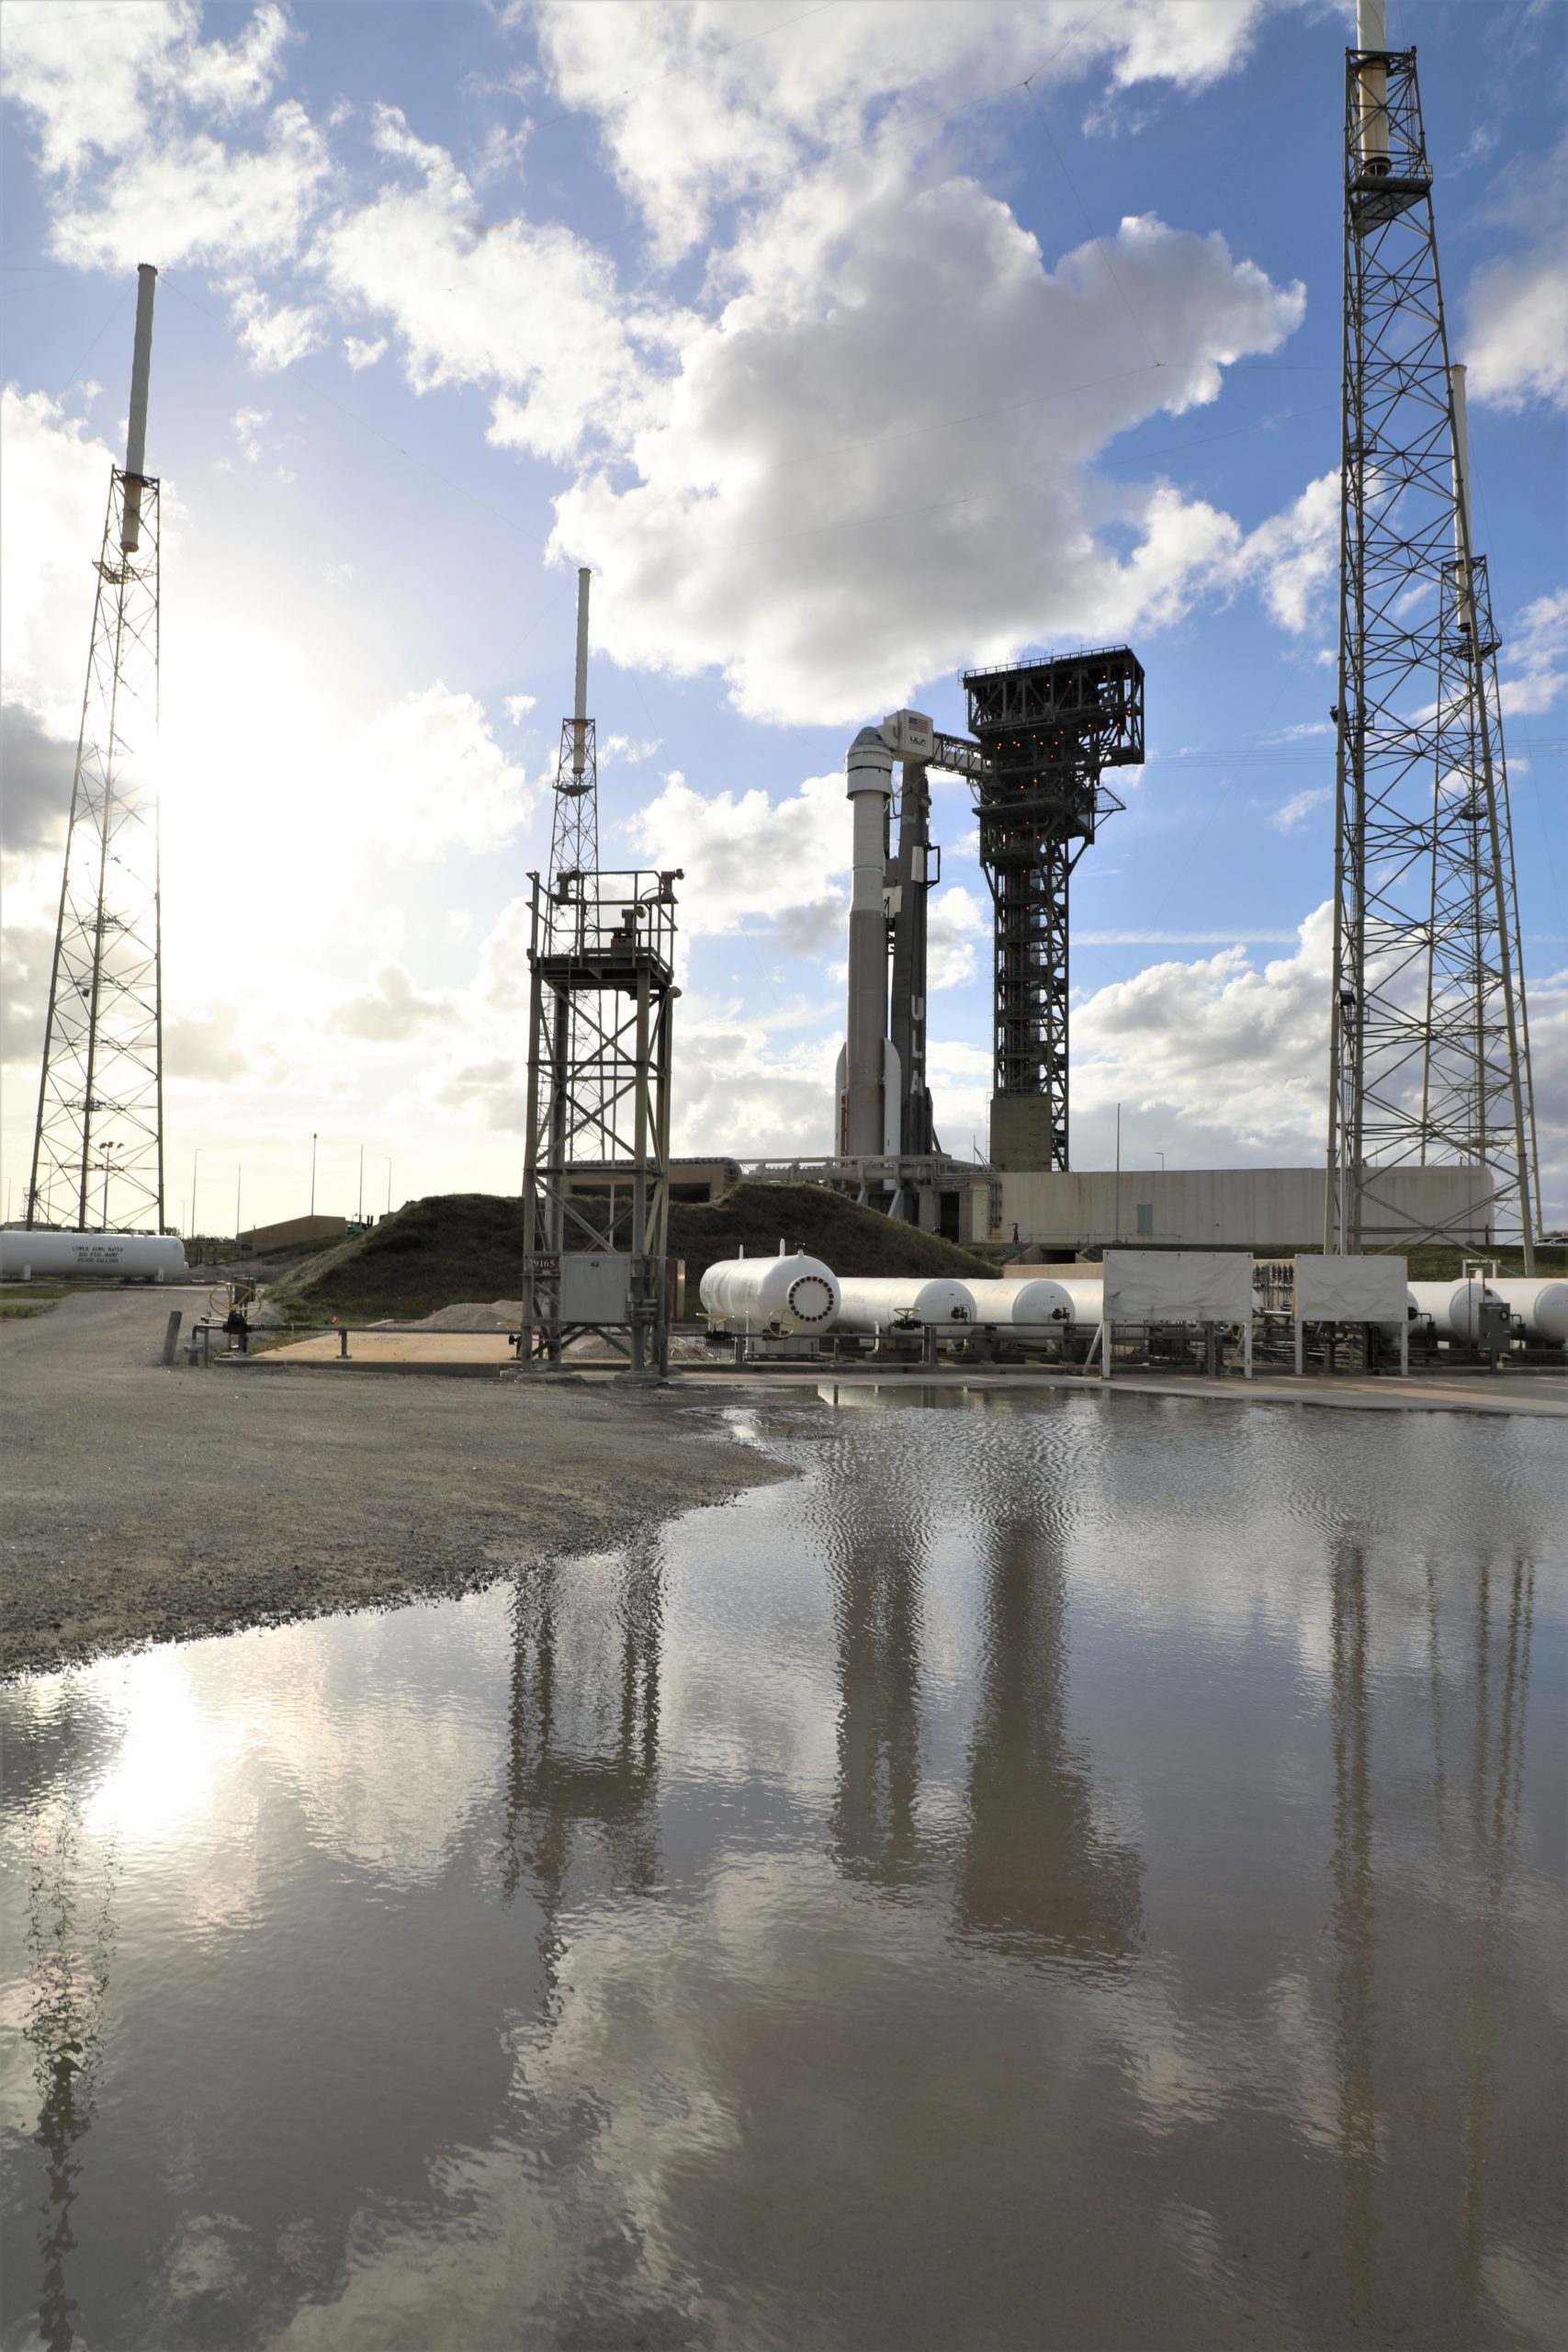 Countdown Begins for Historic 1st Boeing Commercial Starliner Atlas V Launch to Space Station for NASA: Pad Photos/Watch Live